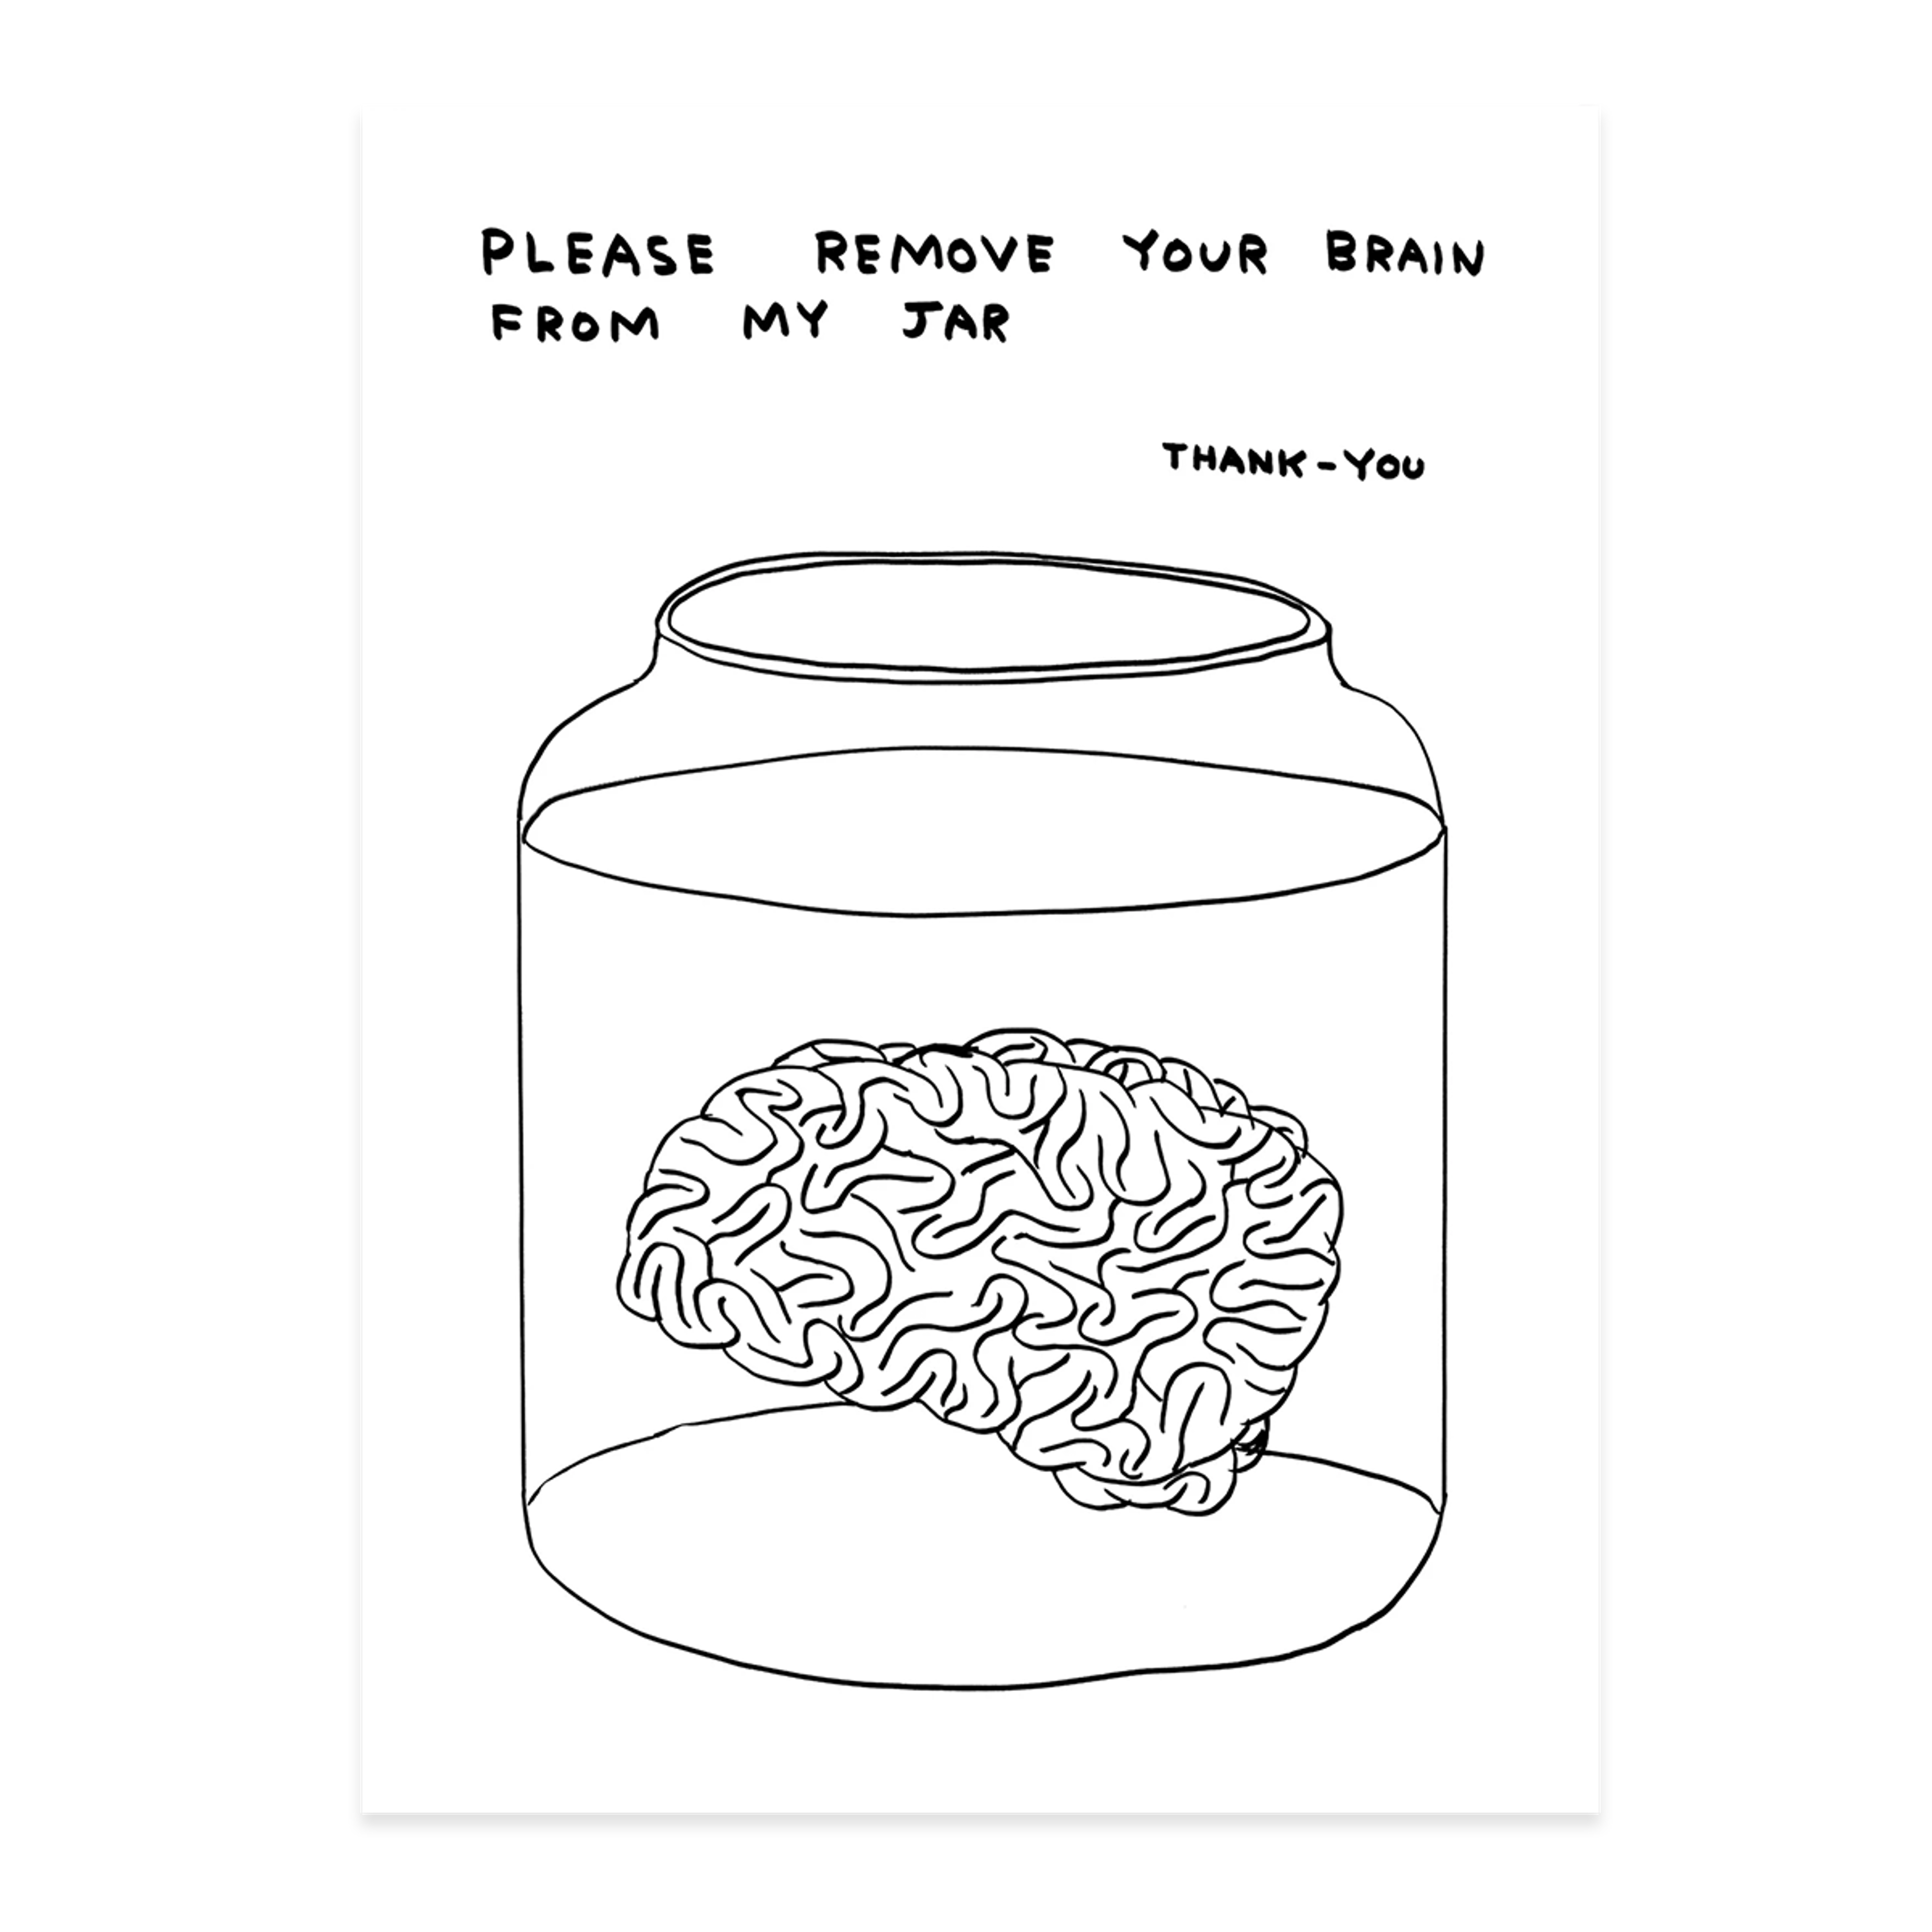 Please remove your brain from my jar